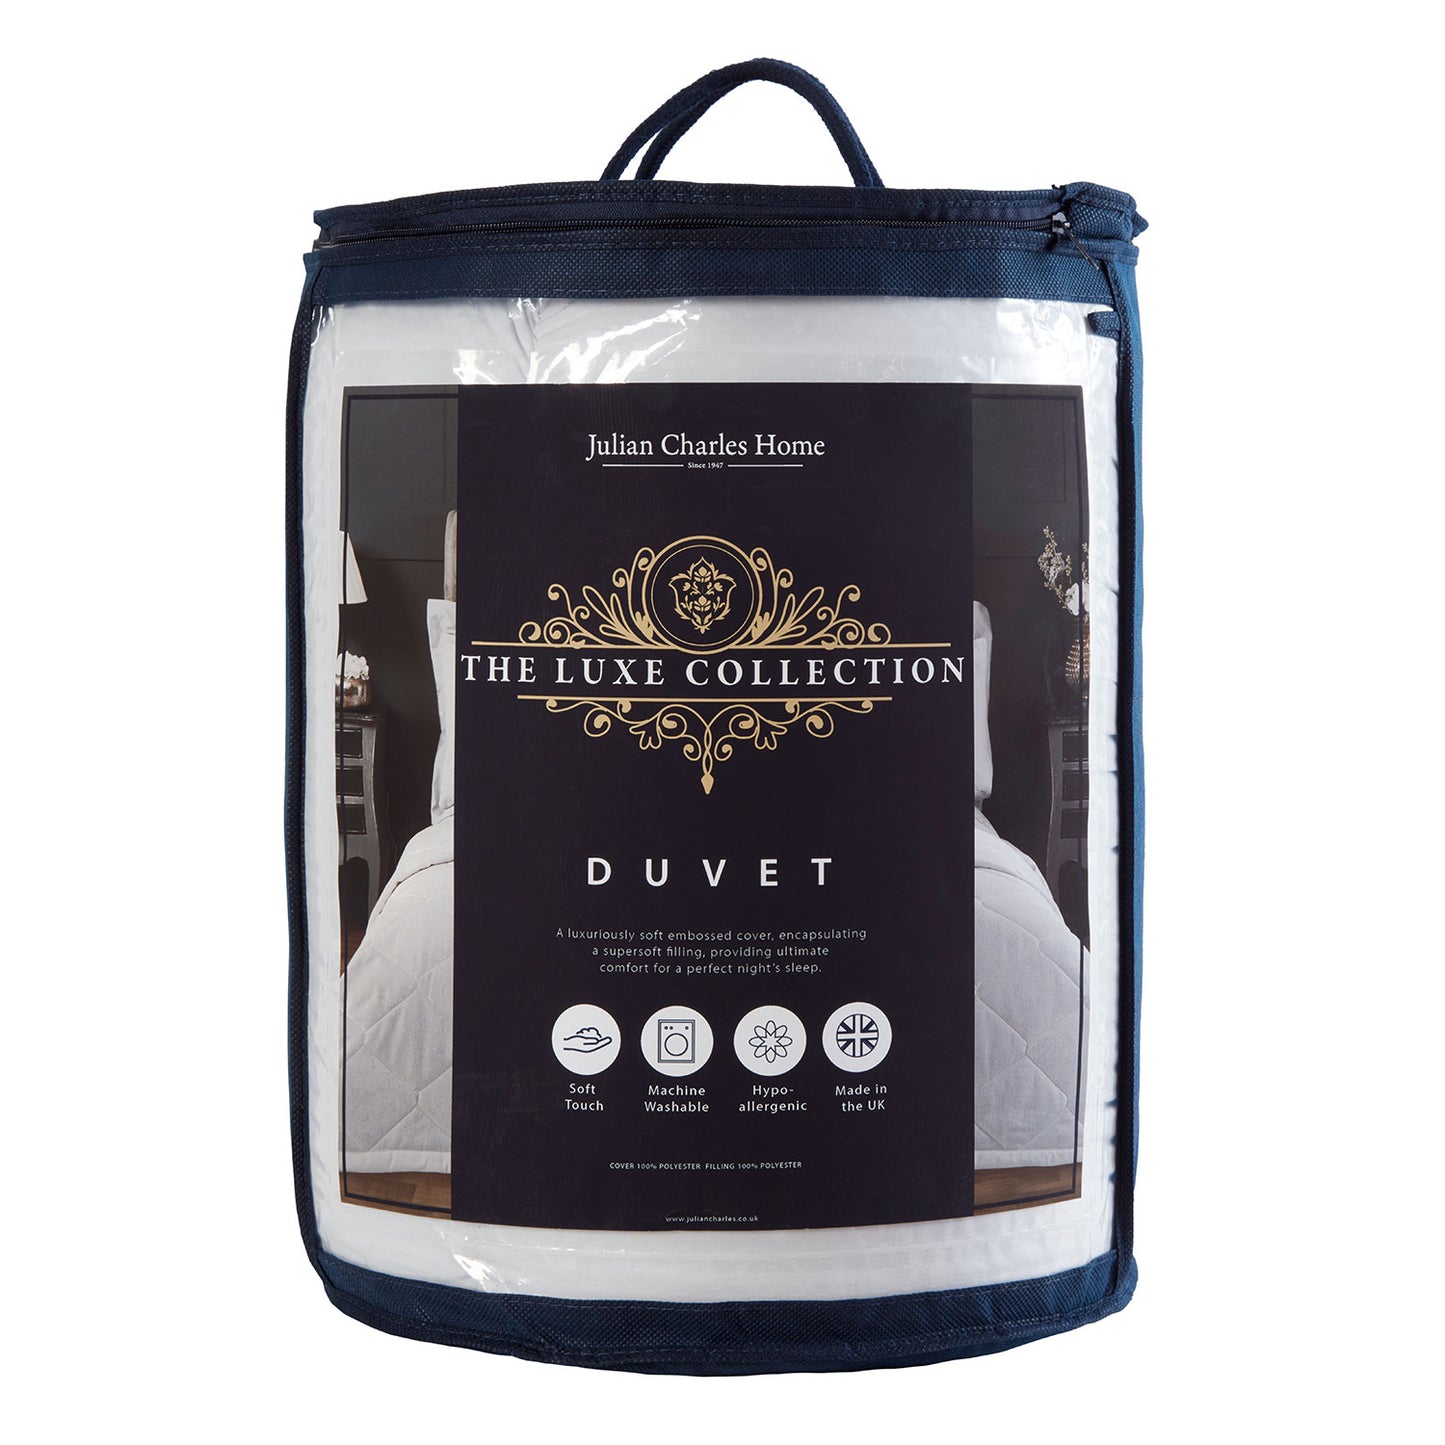 The Luxe Collection 13.5 Tog Duvet